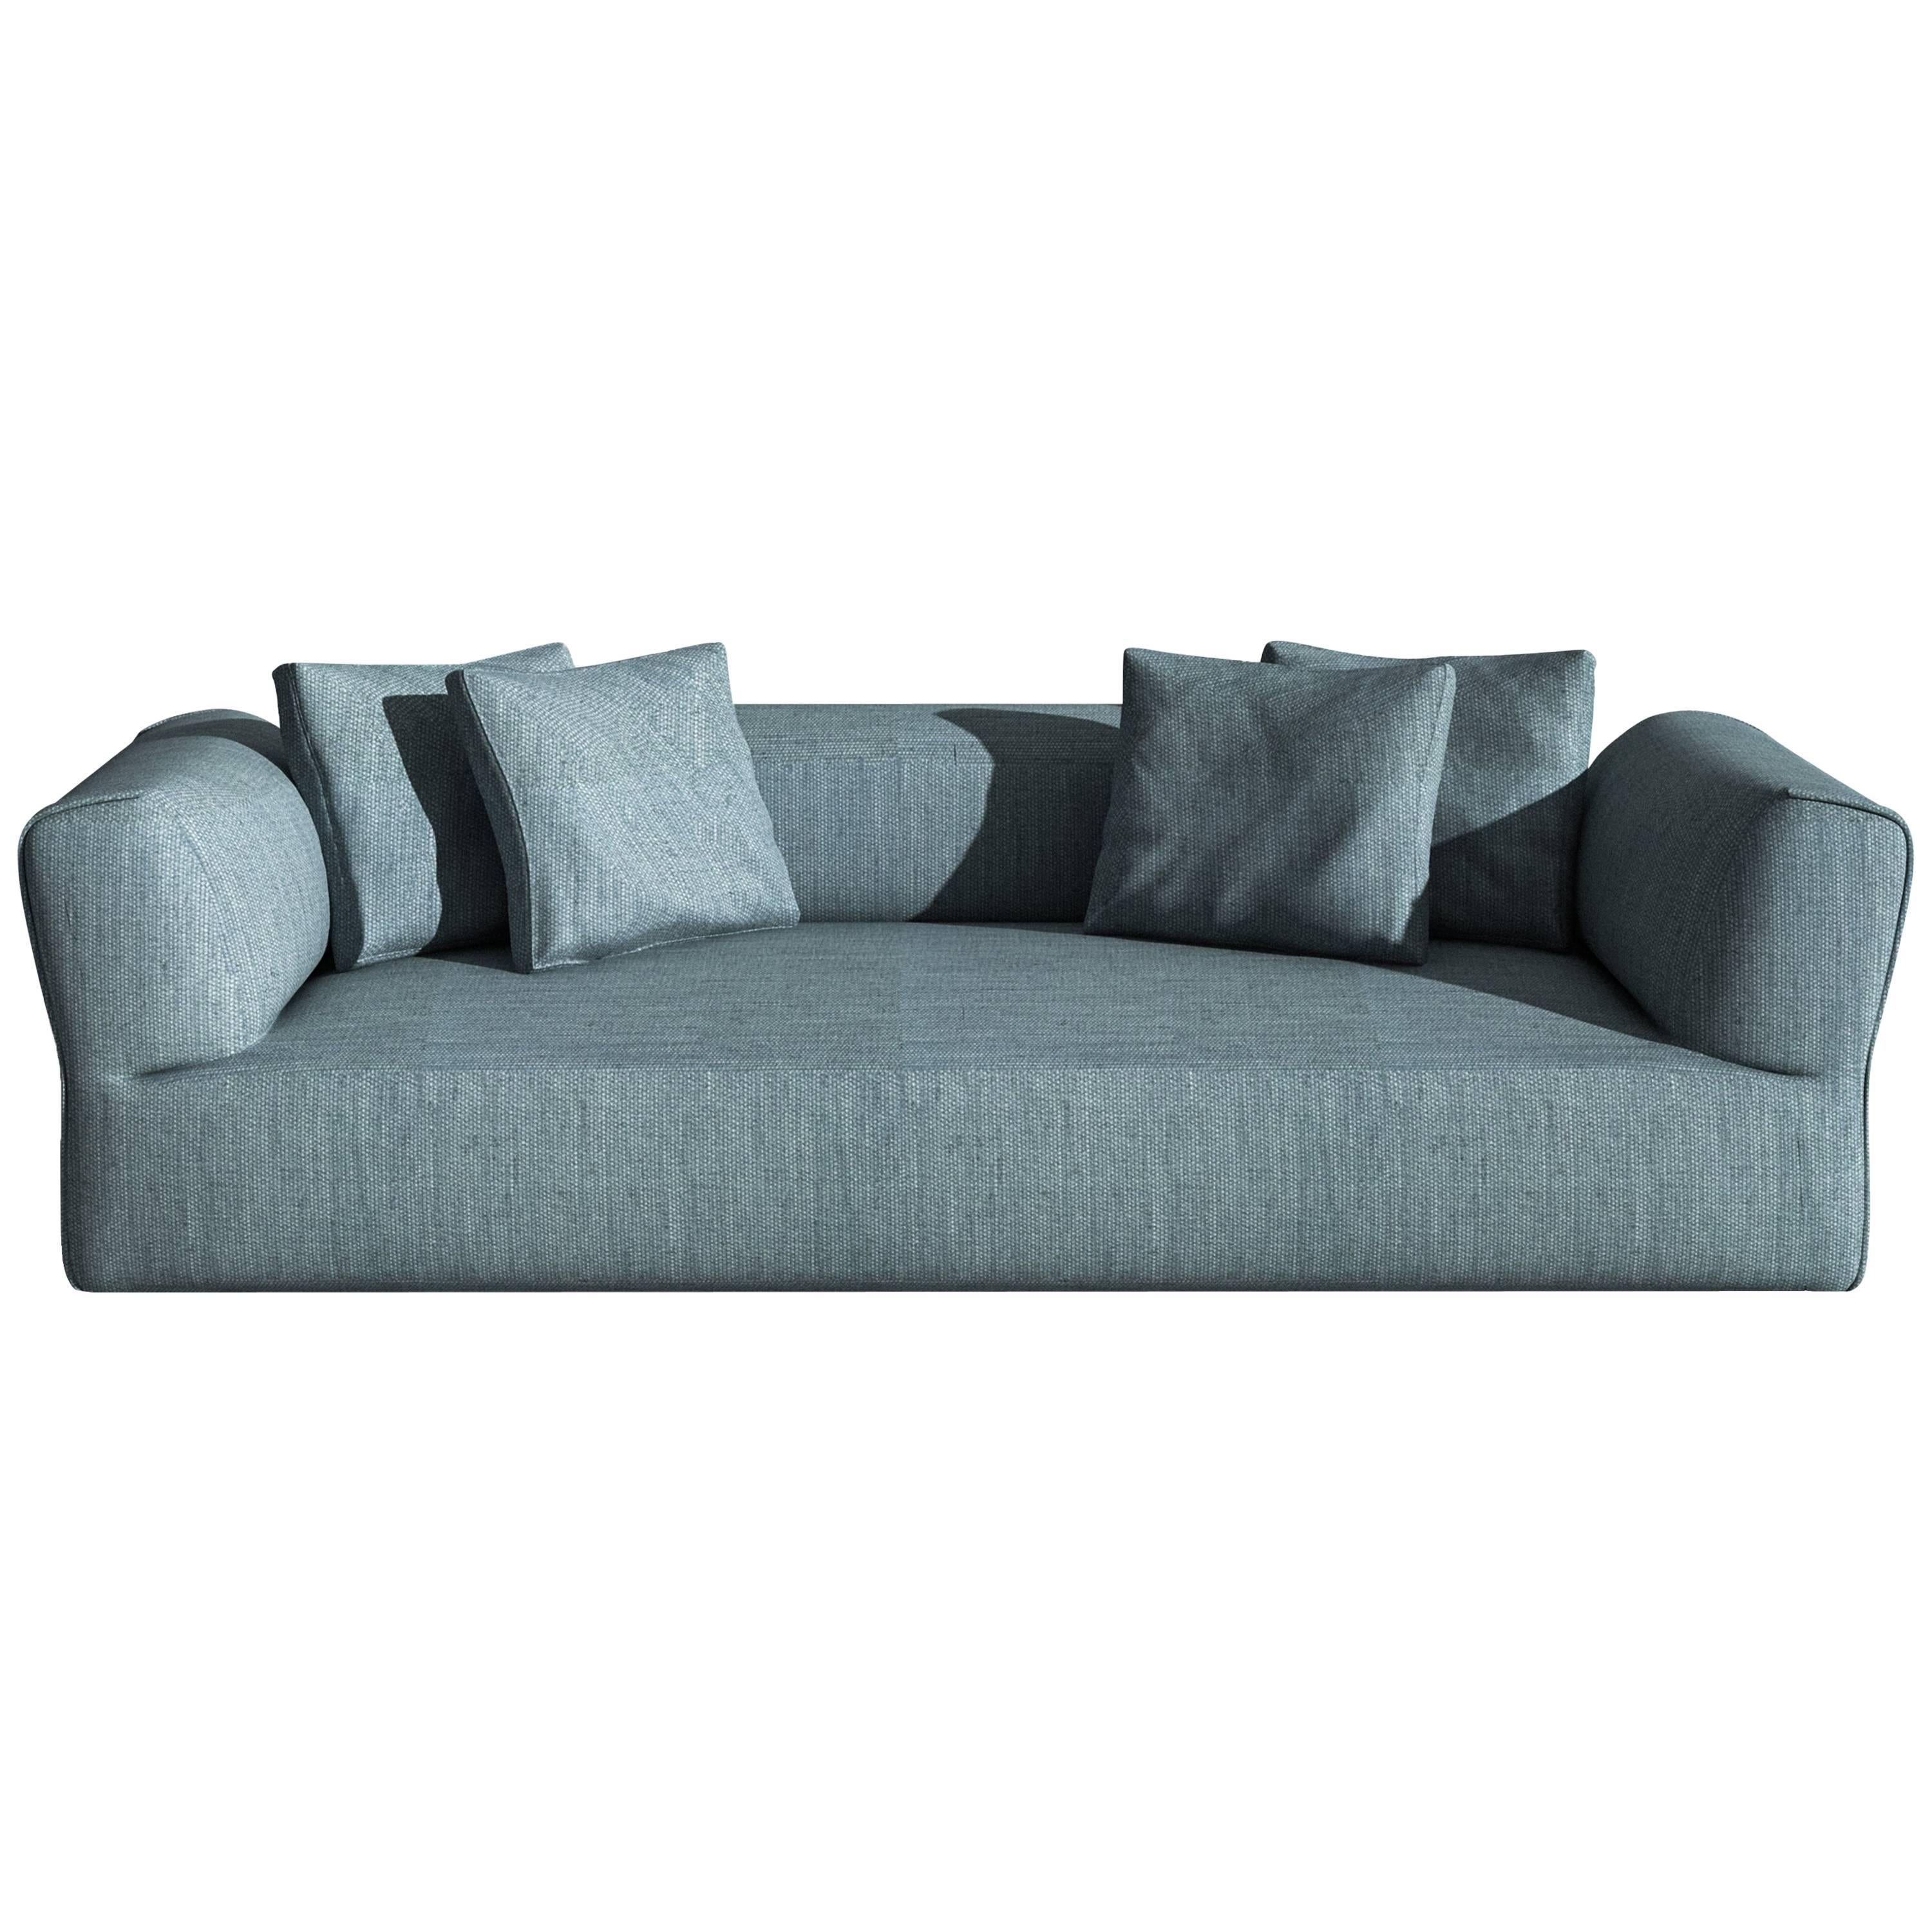 Ludovica +Roberto Palomba Driade "Rever" Three-Seat Sectional Sofa, 2017  For Sale at 1stDibs